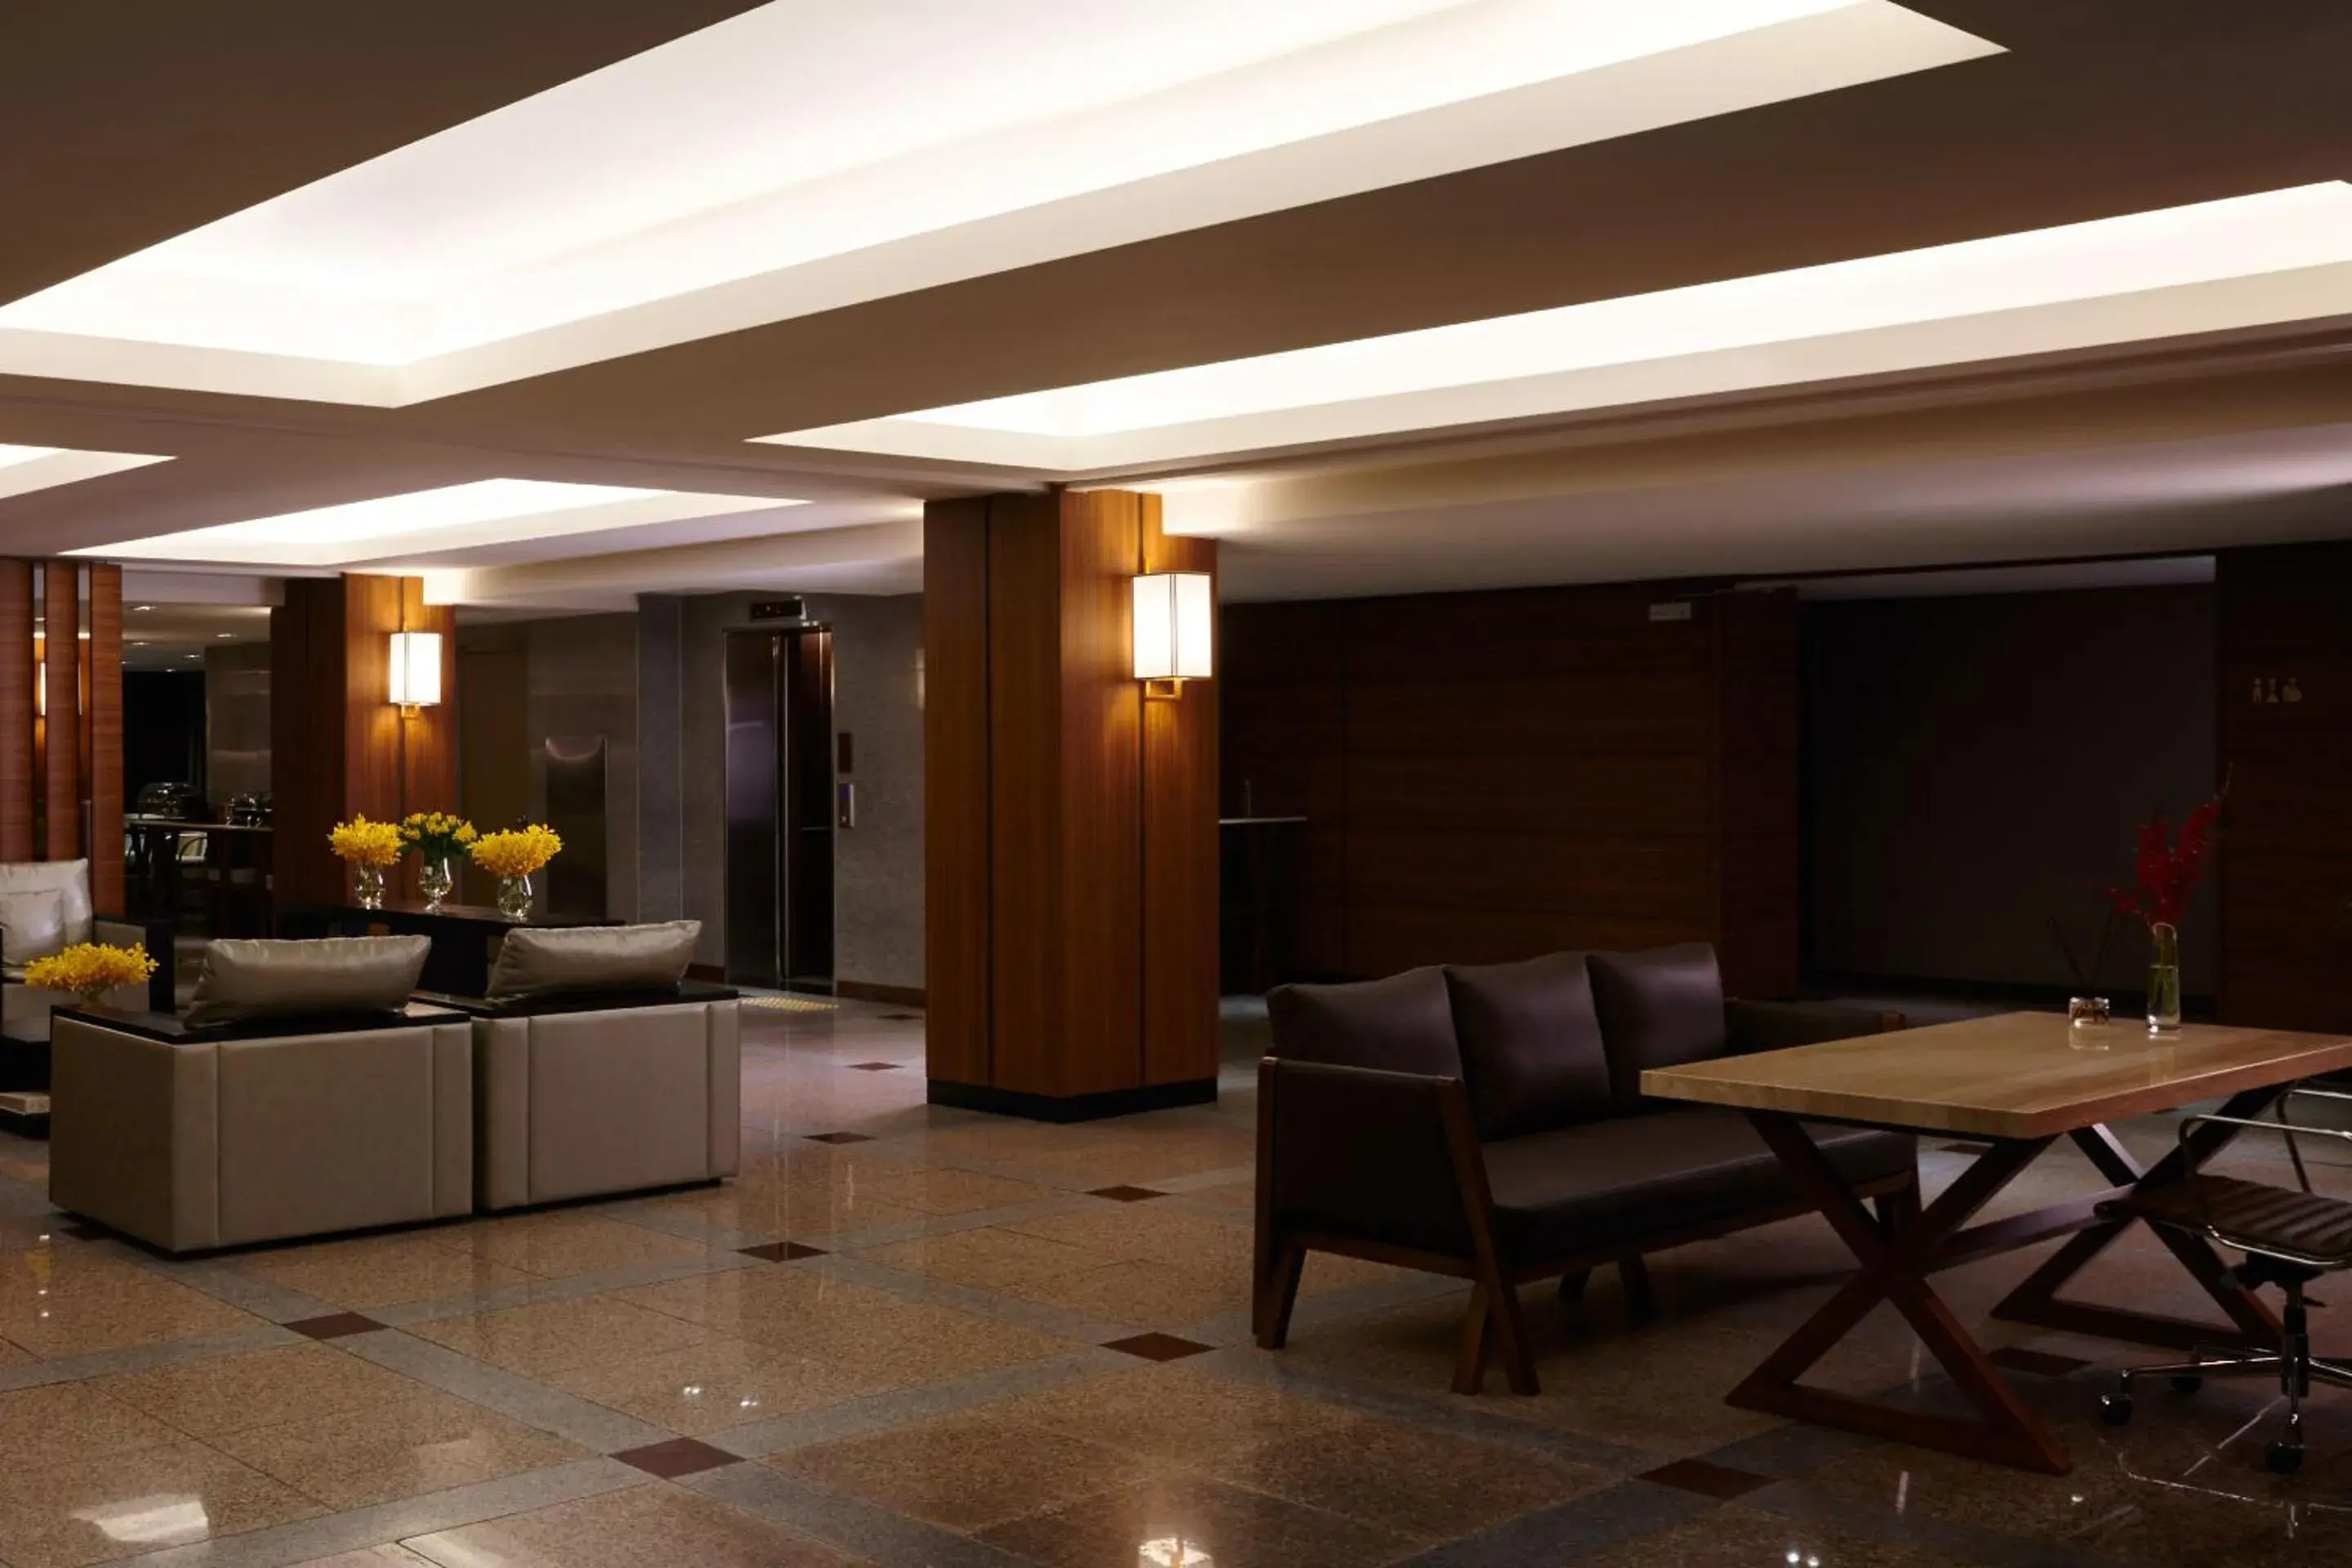 Lobby or reception in Oriens Hotel & Residences Myeongdong